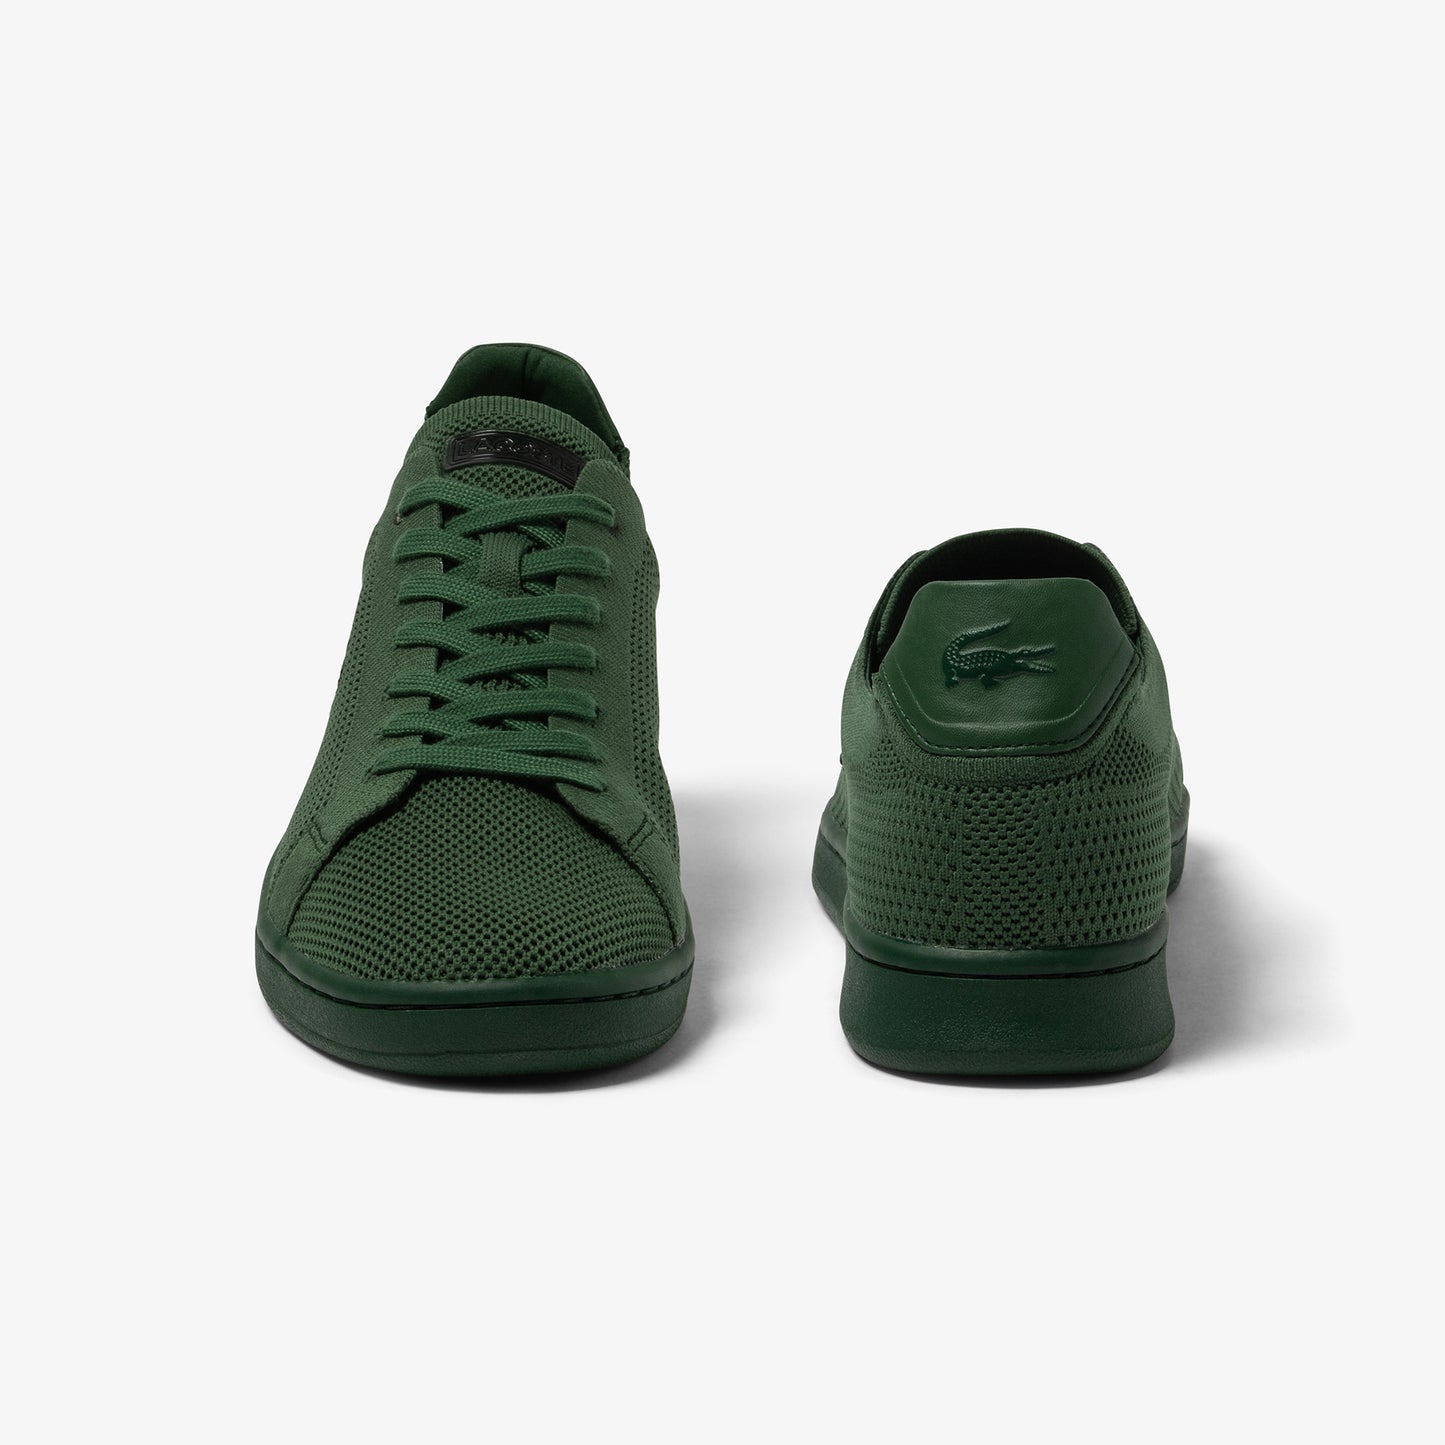 Men's Lacoste Carnaby Piquee Textile Trainers